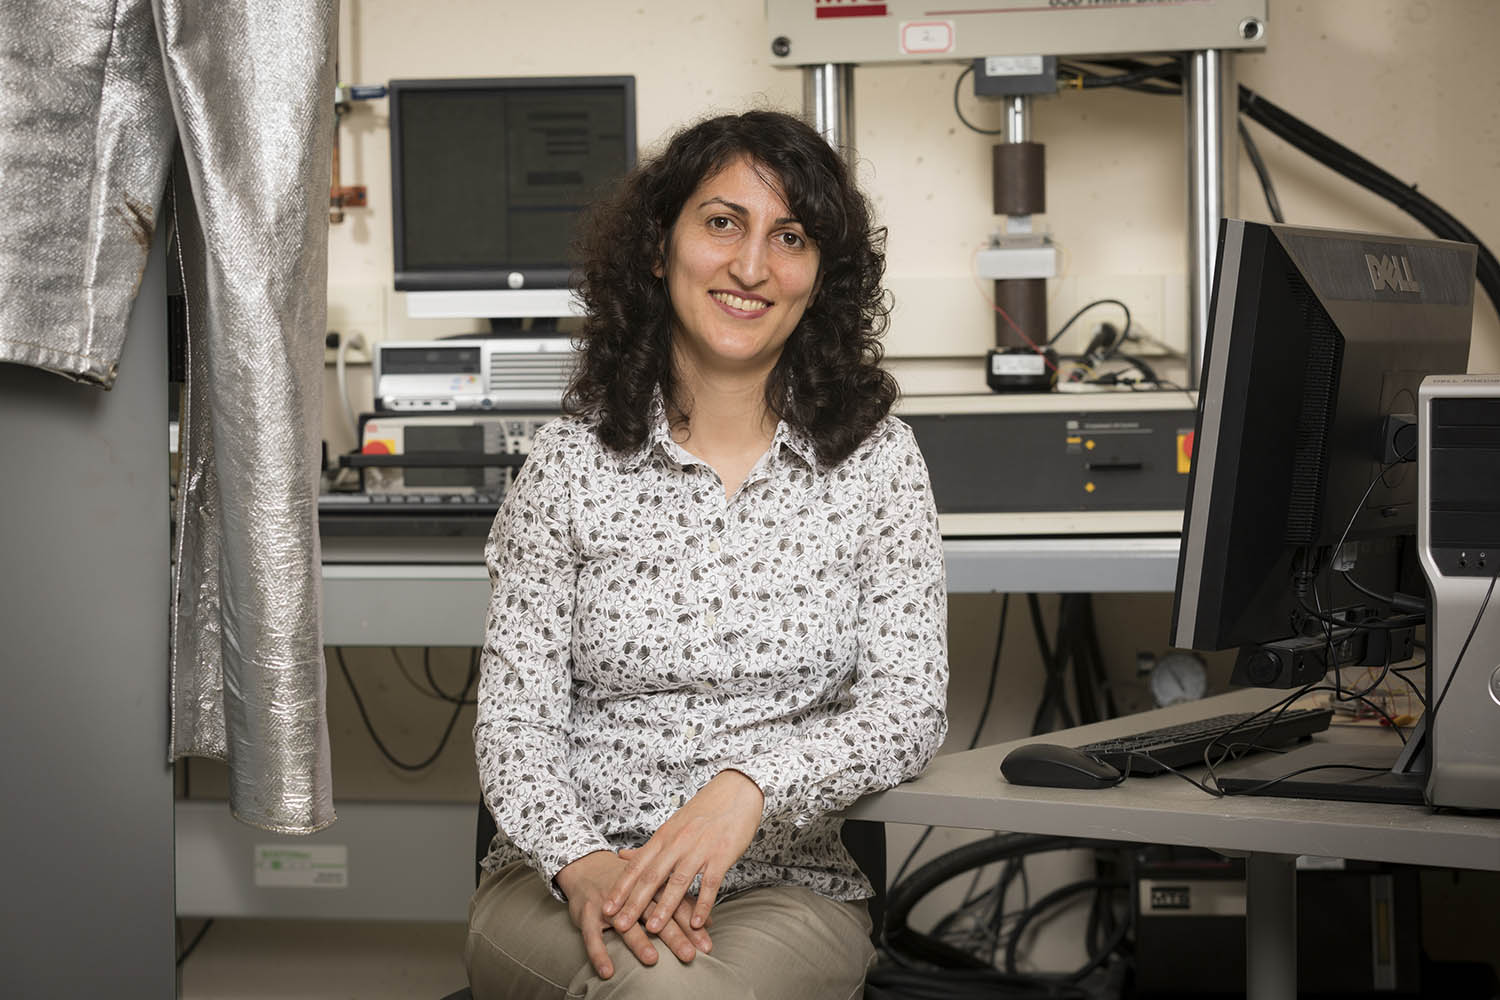 Associate Professor Shahrzad (Sherry) Towfighian from the Thomas J. Watson School of Engineering and Applied Sciences’ Department of Mechanical Engineering studies microelectromechanical systems.